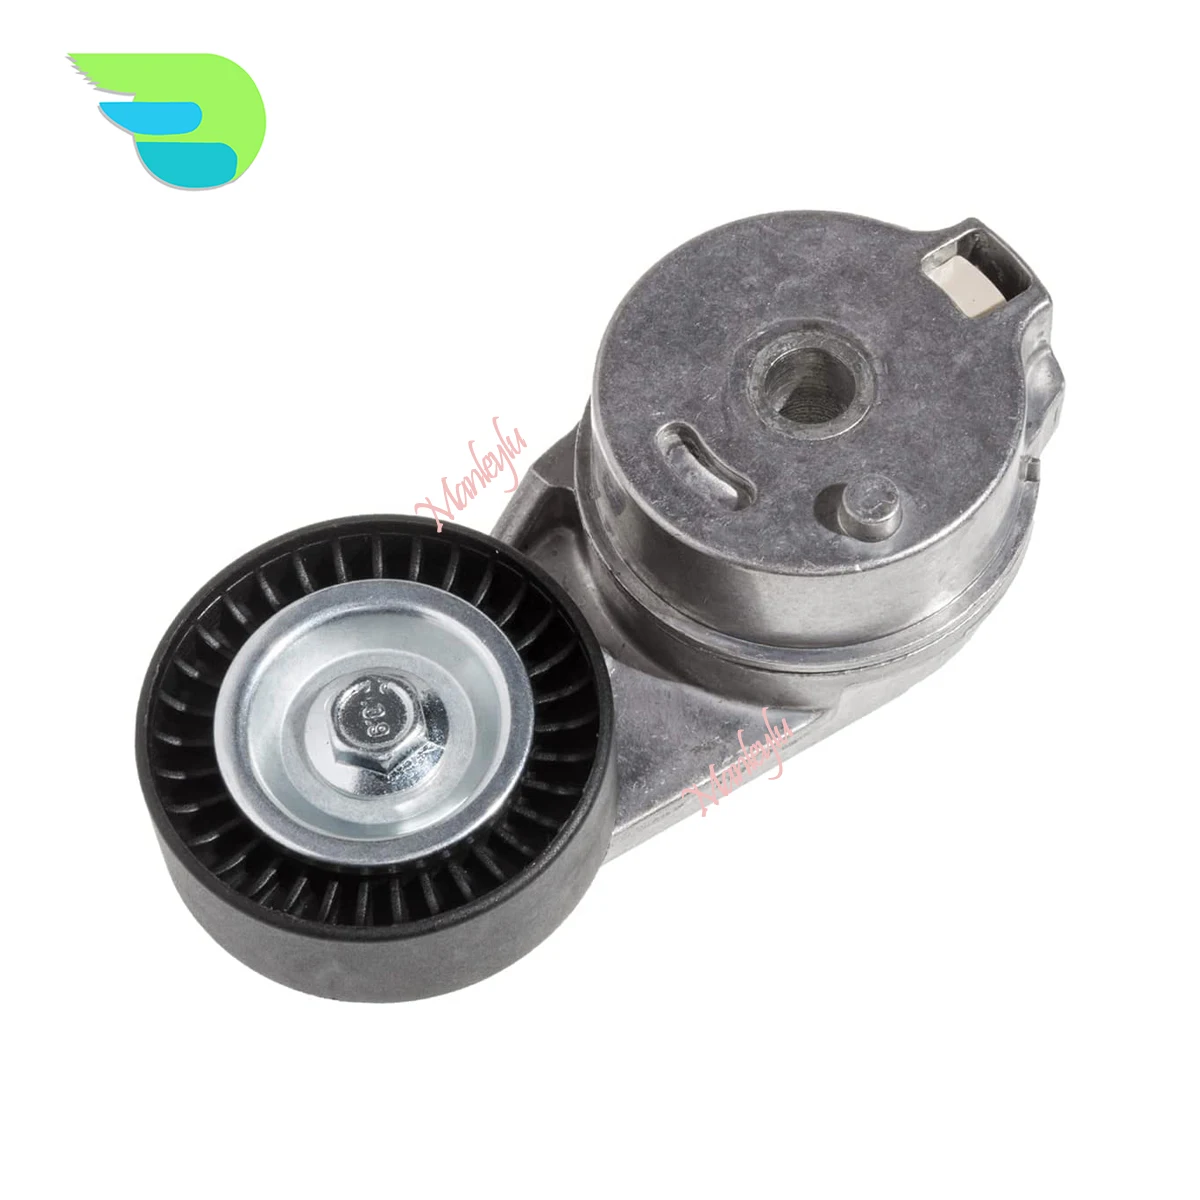 

4593817AB 4861660AA Belt Automatic Tensioner For CHRYSLER 300 2.7L V6 Jeep Grand Cherokee Ram 1500 2.7 3.5 5.7L 6.4L